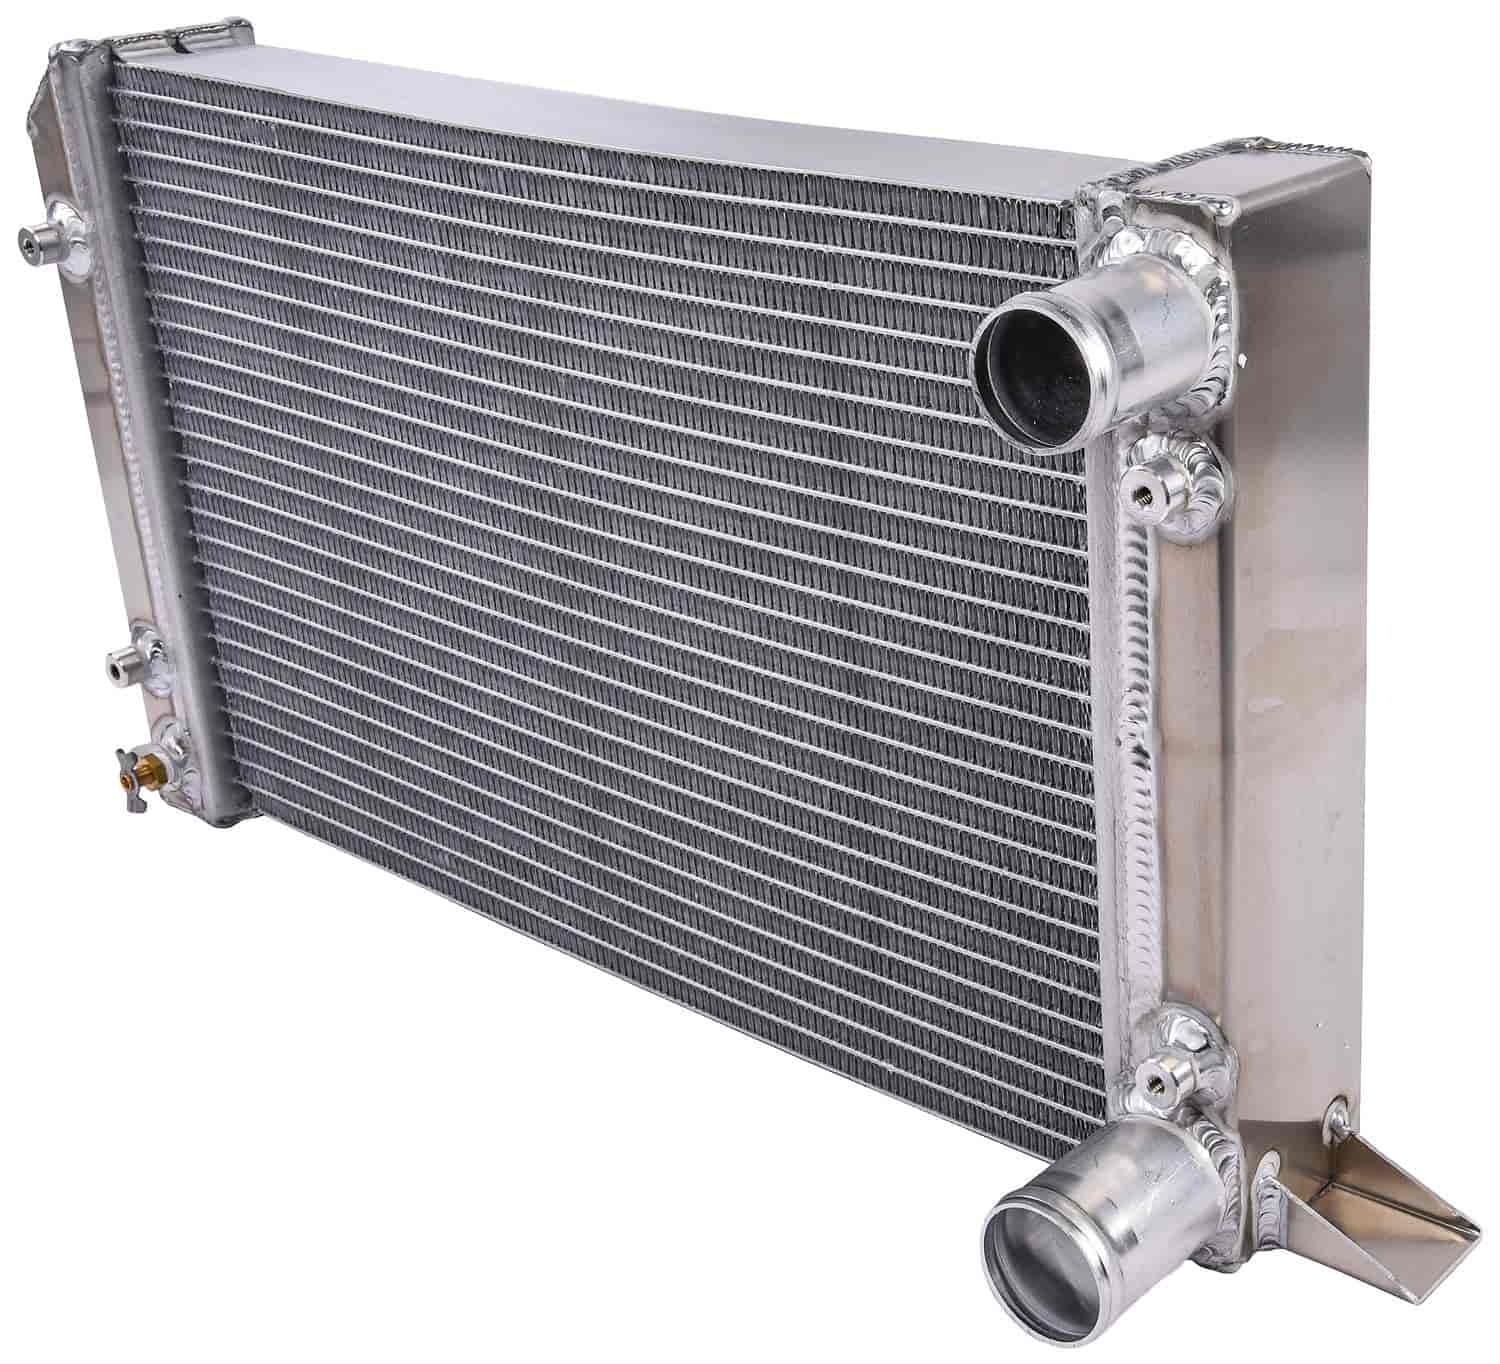 Scirocco/Pro Stock Style Lightweight Aluminum Radiator, 2 Row [Drag Race Only]